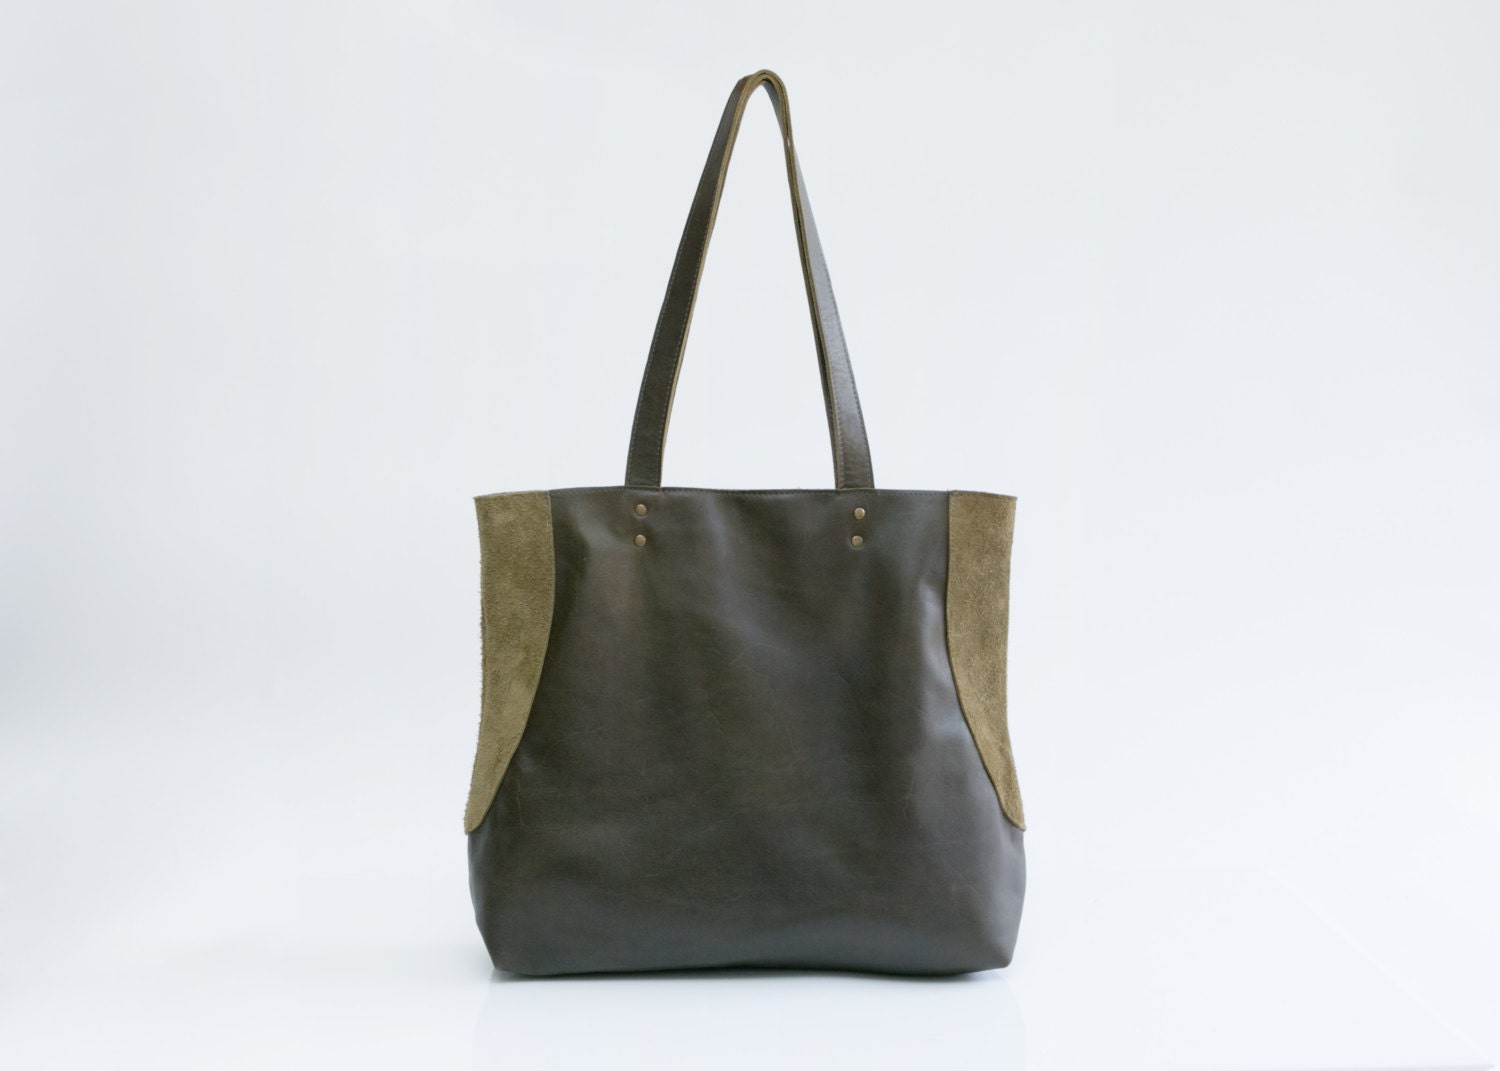 Green Leather Tote Bag Soft Leather Bag Tote Bag by maykobags